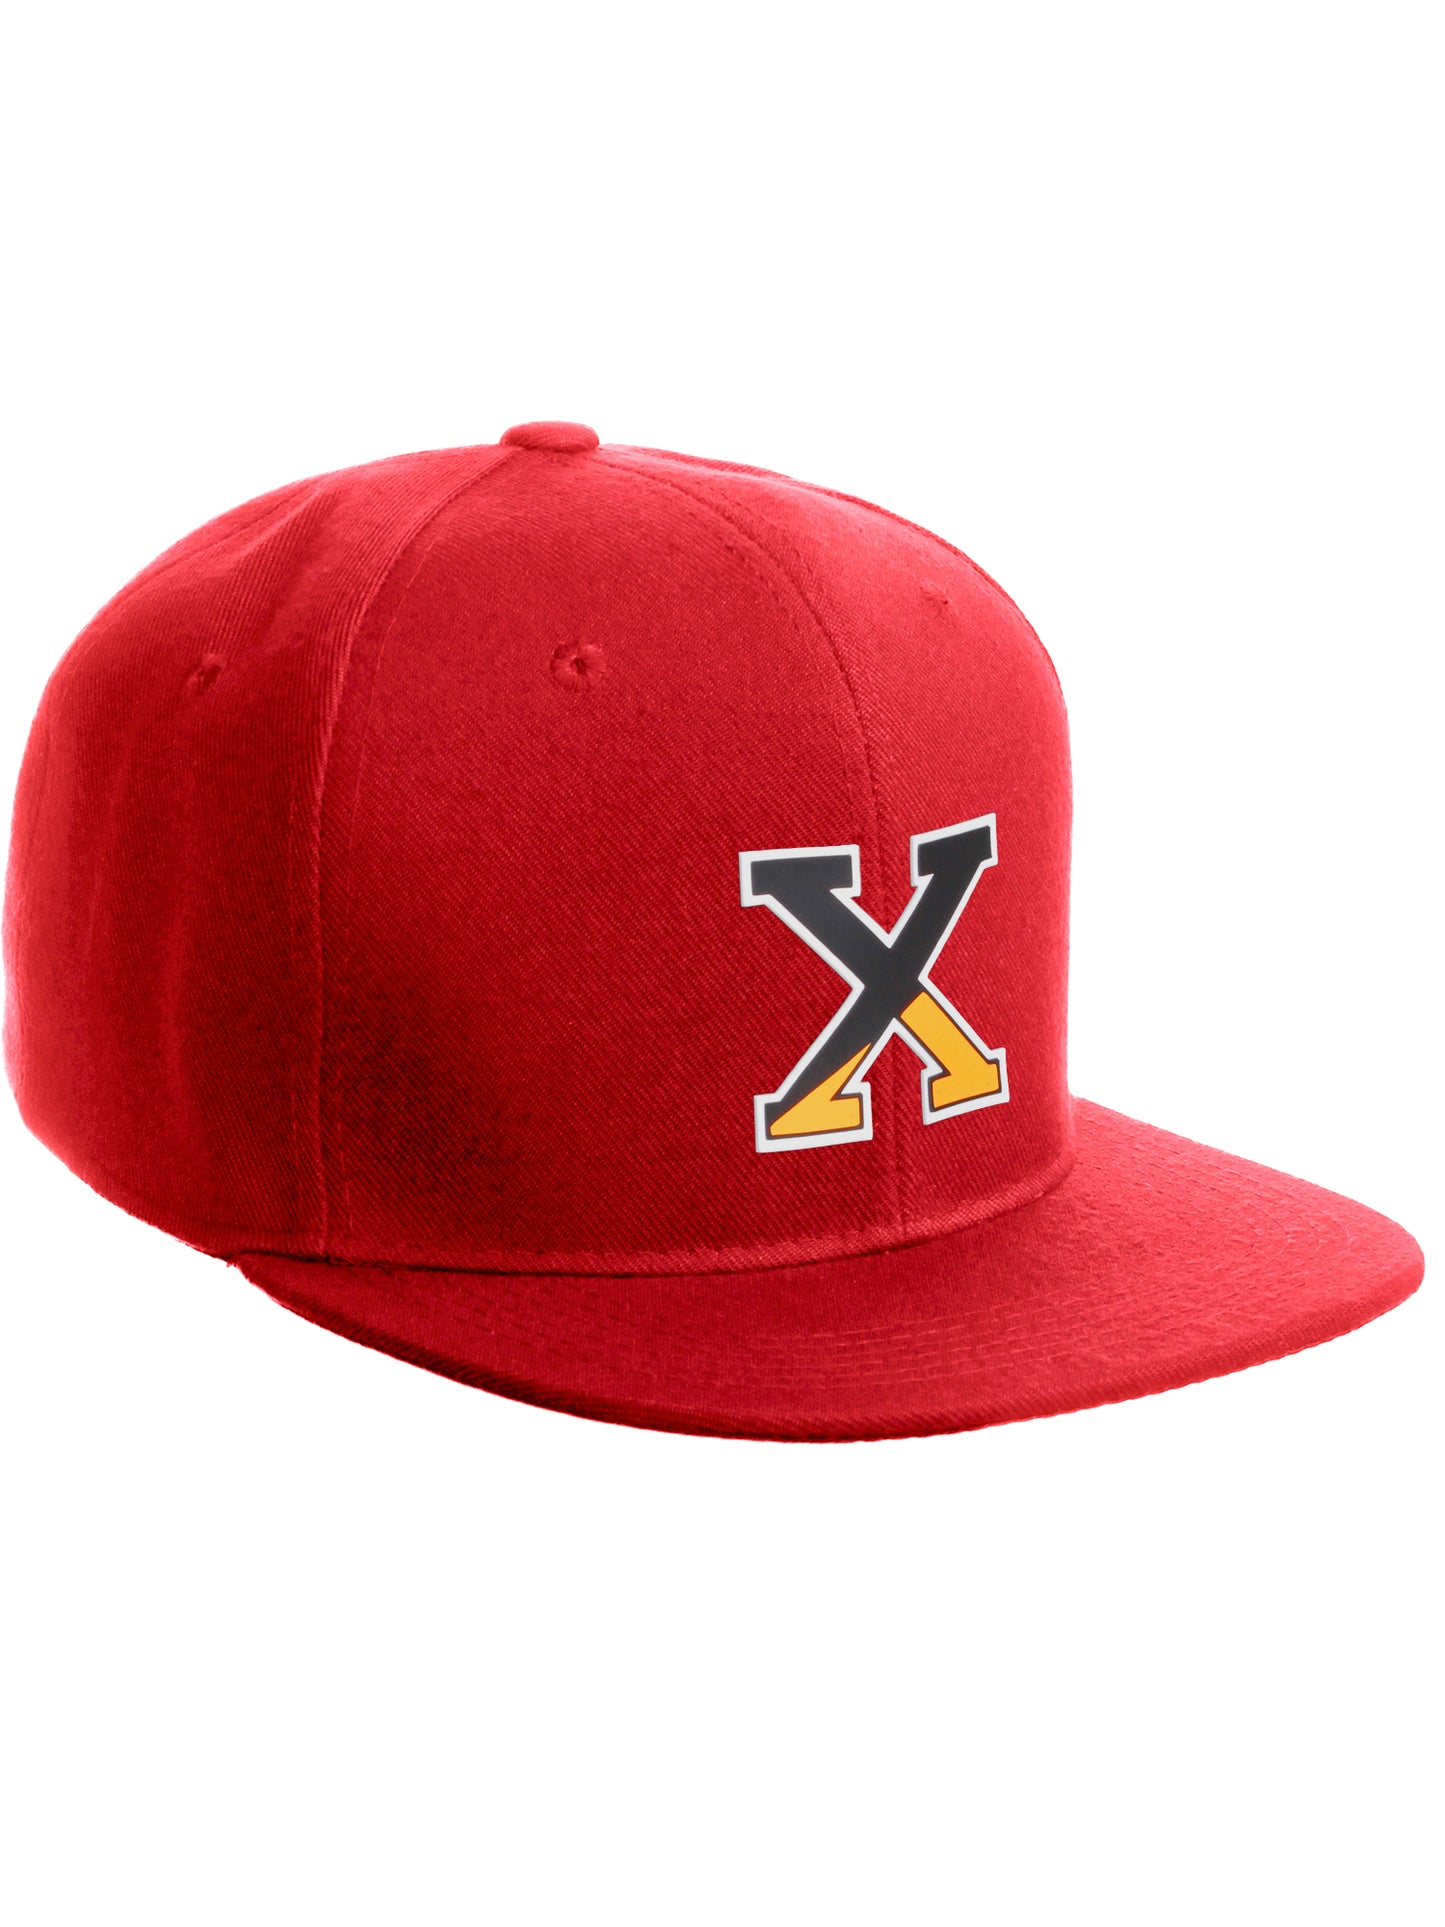 Daxton Classic Snapback Initial Numbers Letters Flat Bill Visor Red Cap